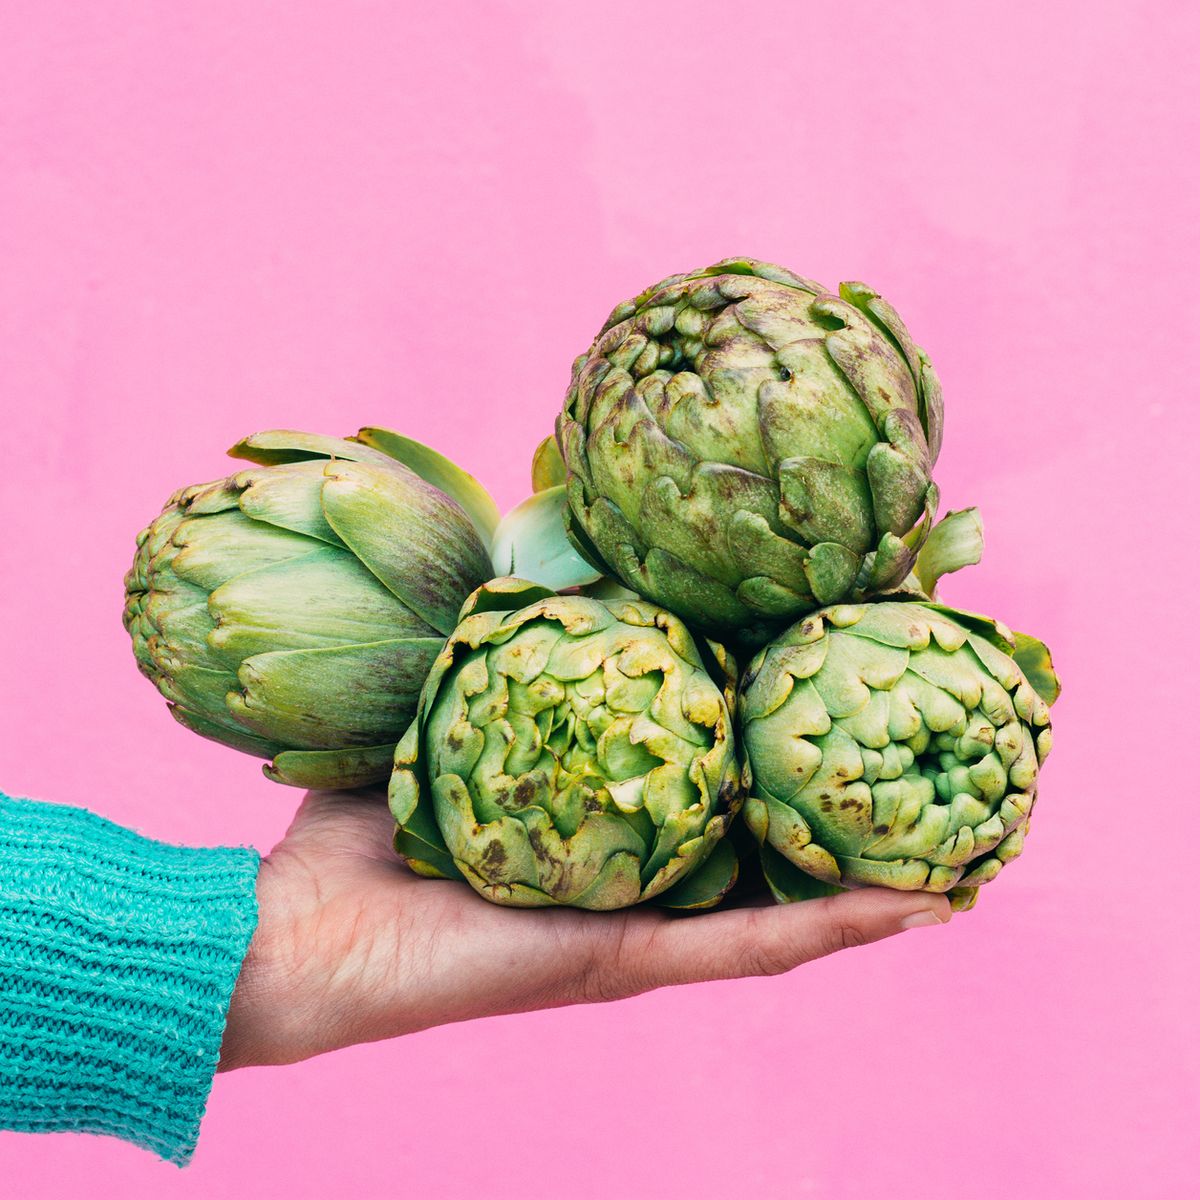 hand holding four artichokes on a pink background